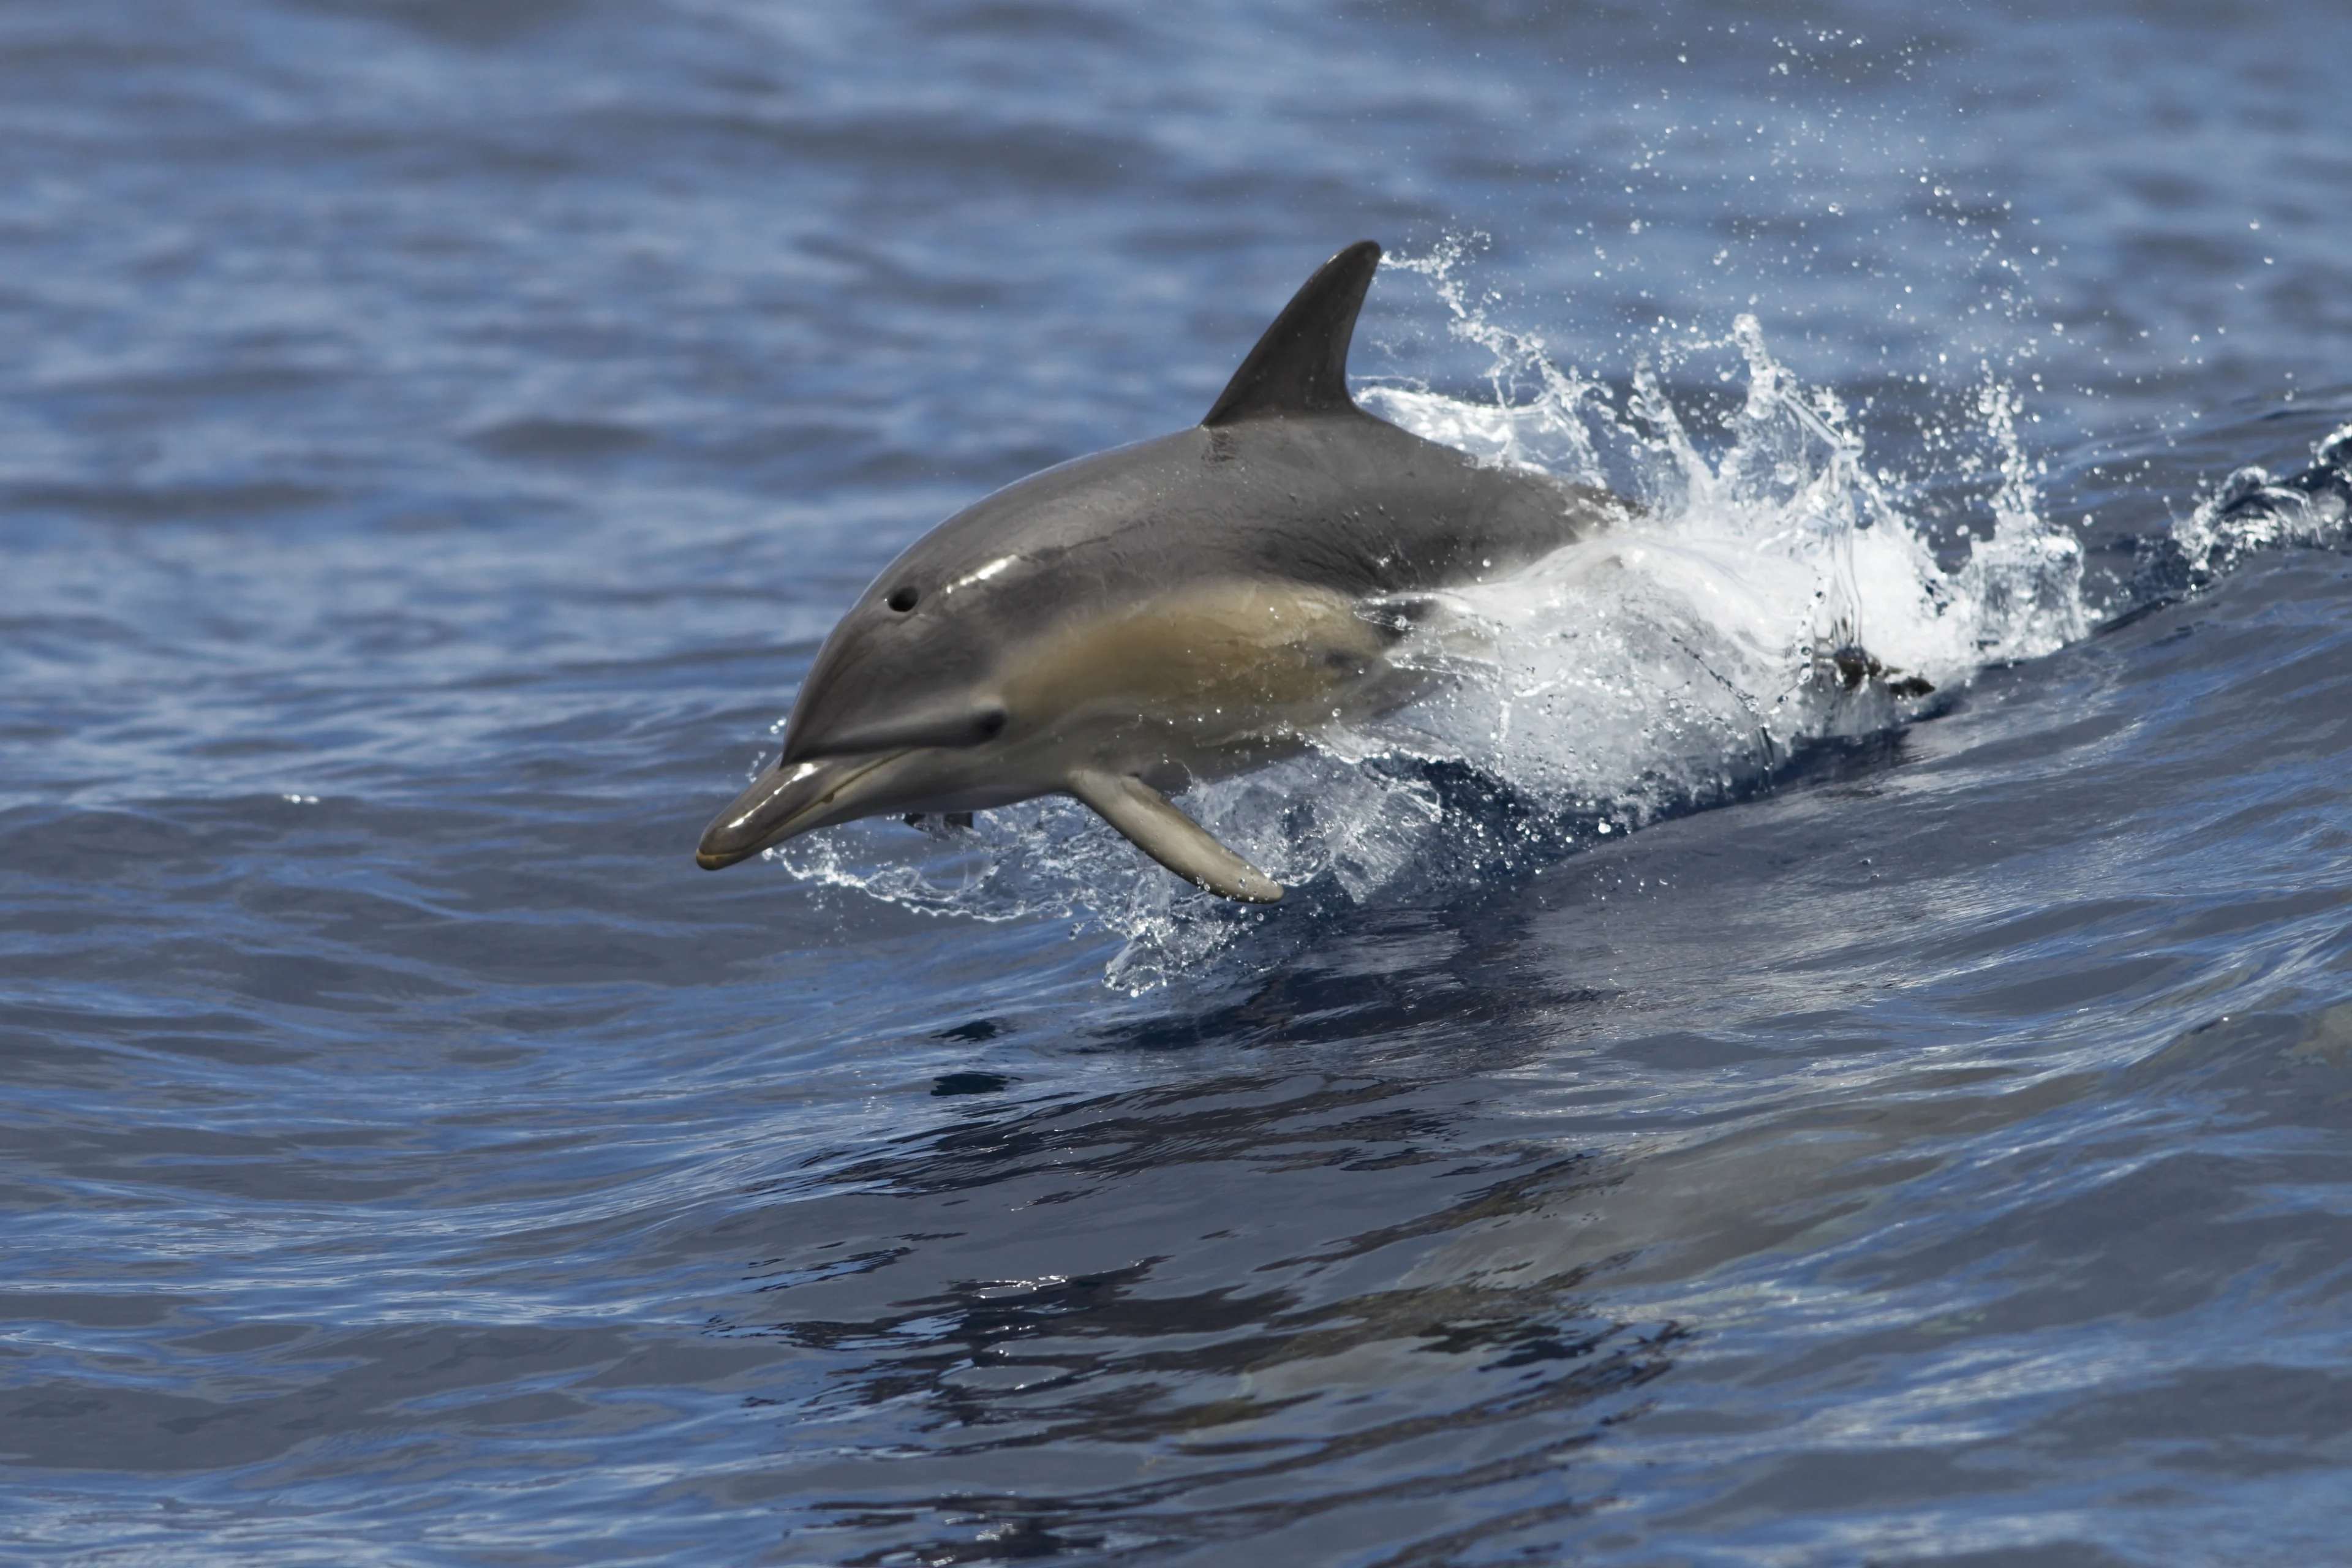 A dolphin jumping out of the water near Port Fairy, Victoria.